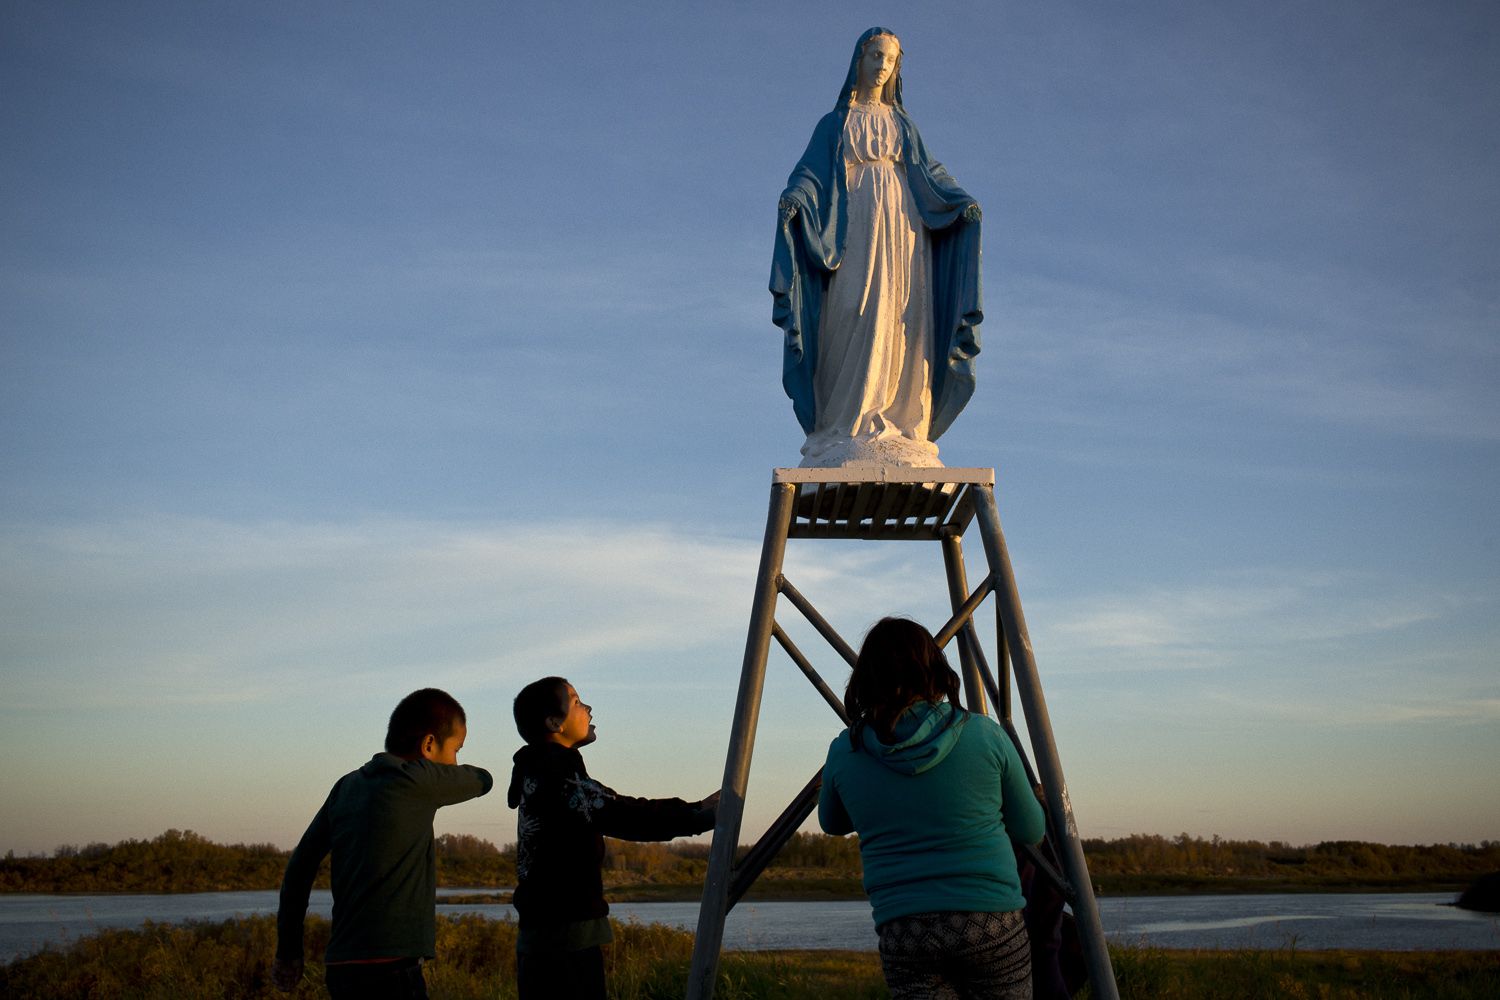 Young people play at a statue of the Virgin Mary near the St. François-Xavier Catholic Church on the shores of the Attawapiskat River in northern Ontario. The community has a complicated history with the Catholic Church, with many of its members subjected to horrible abuses while at the Catholic-run St. Anne’s Residential School. Image by David Maurice Smith/Oculi. Canada, 2016.